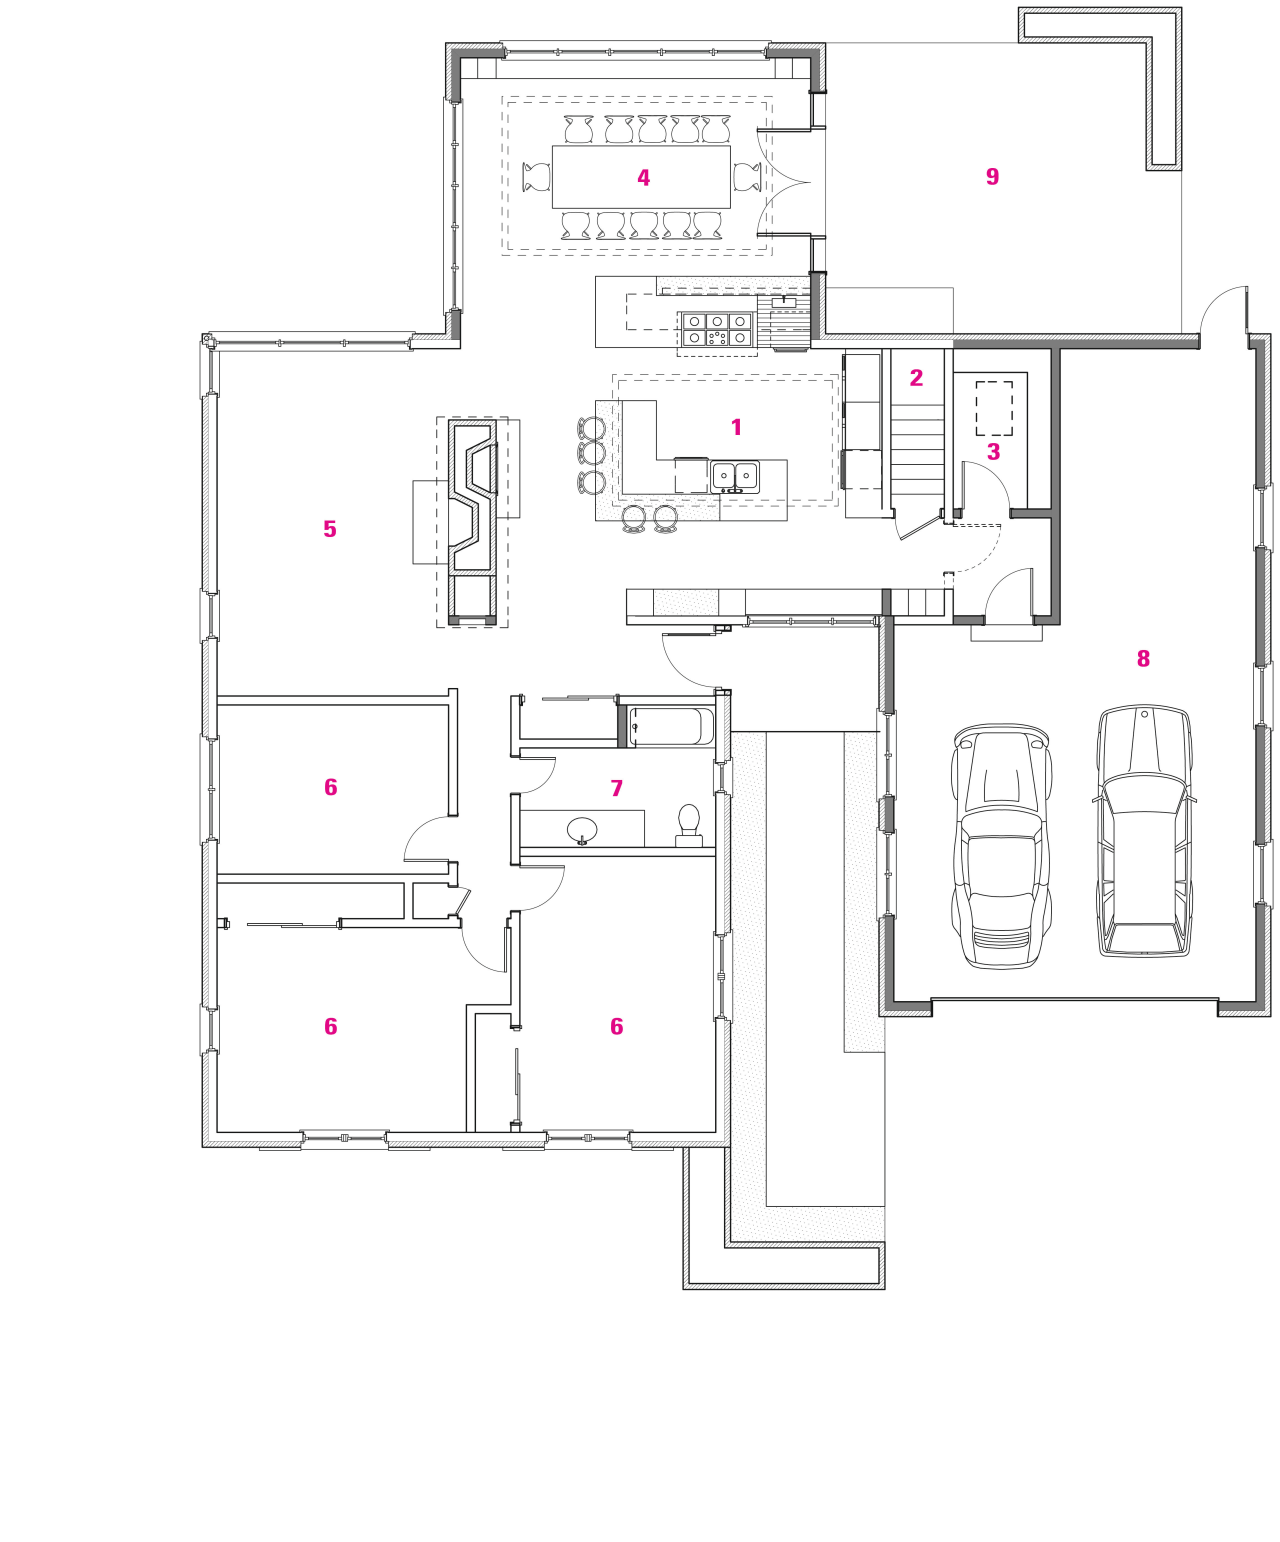 Image of floor plans for the renovation. area, design, diagram, drawing, floor plan, line, plan, product, product design, text, white